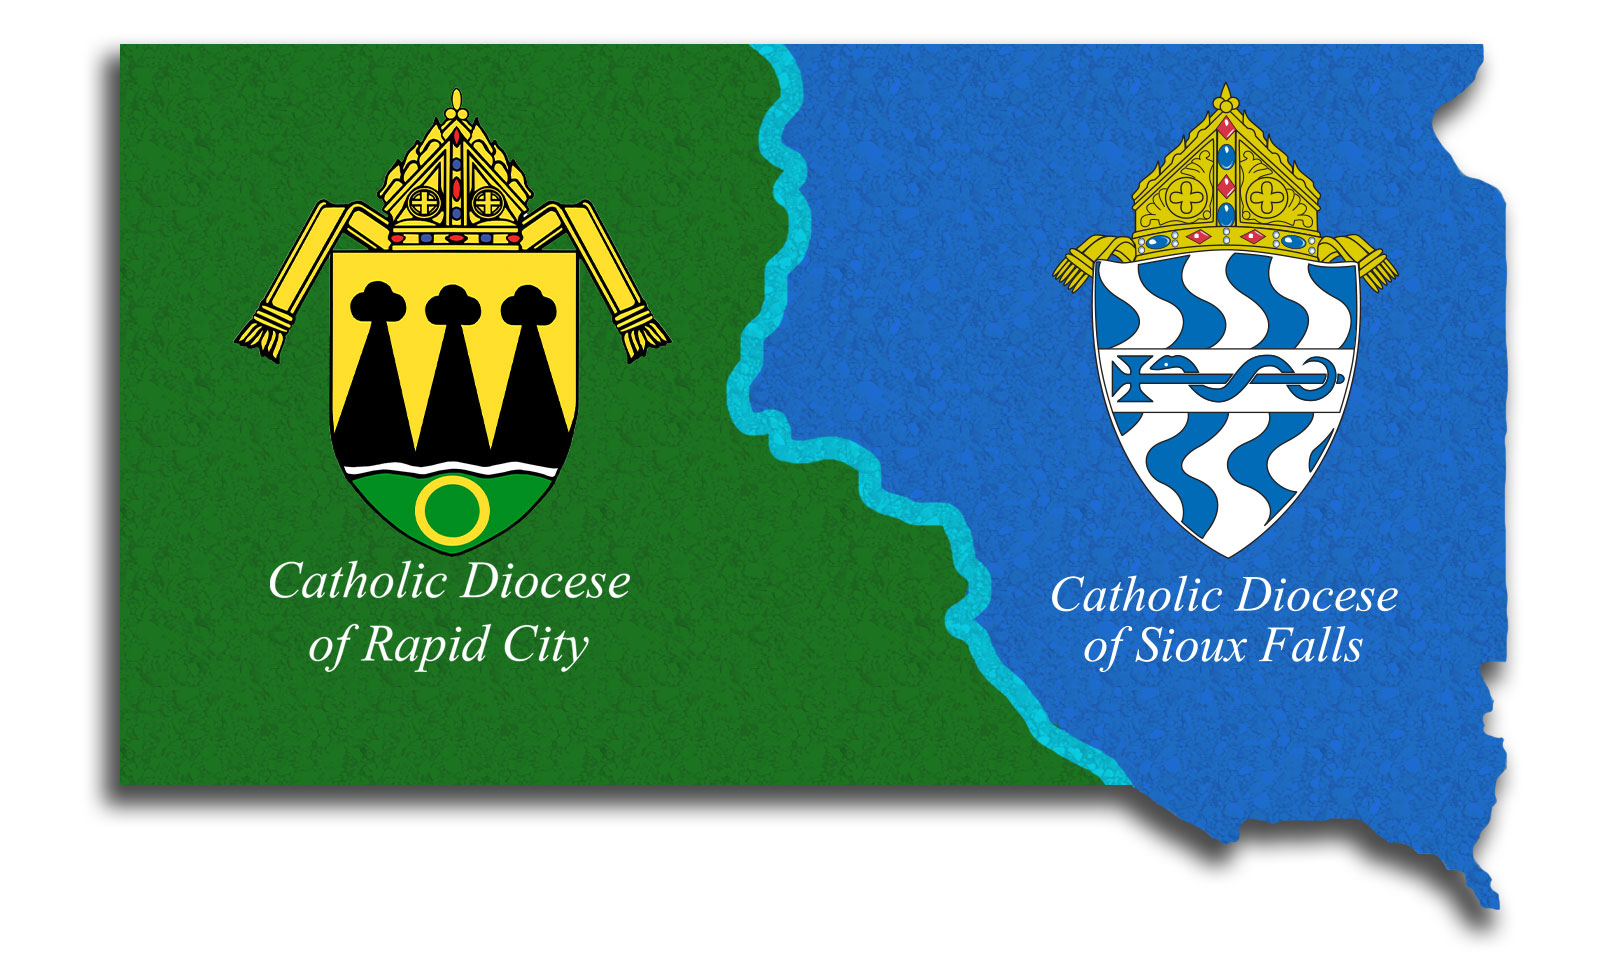 Statement of the Bishops of South Dakota Regarding Covid-19 Vaccination Requirements